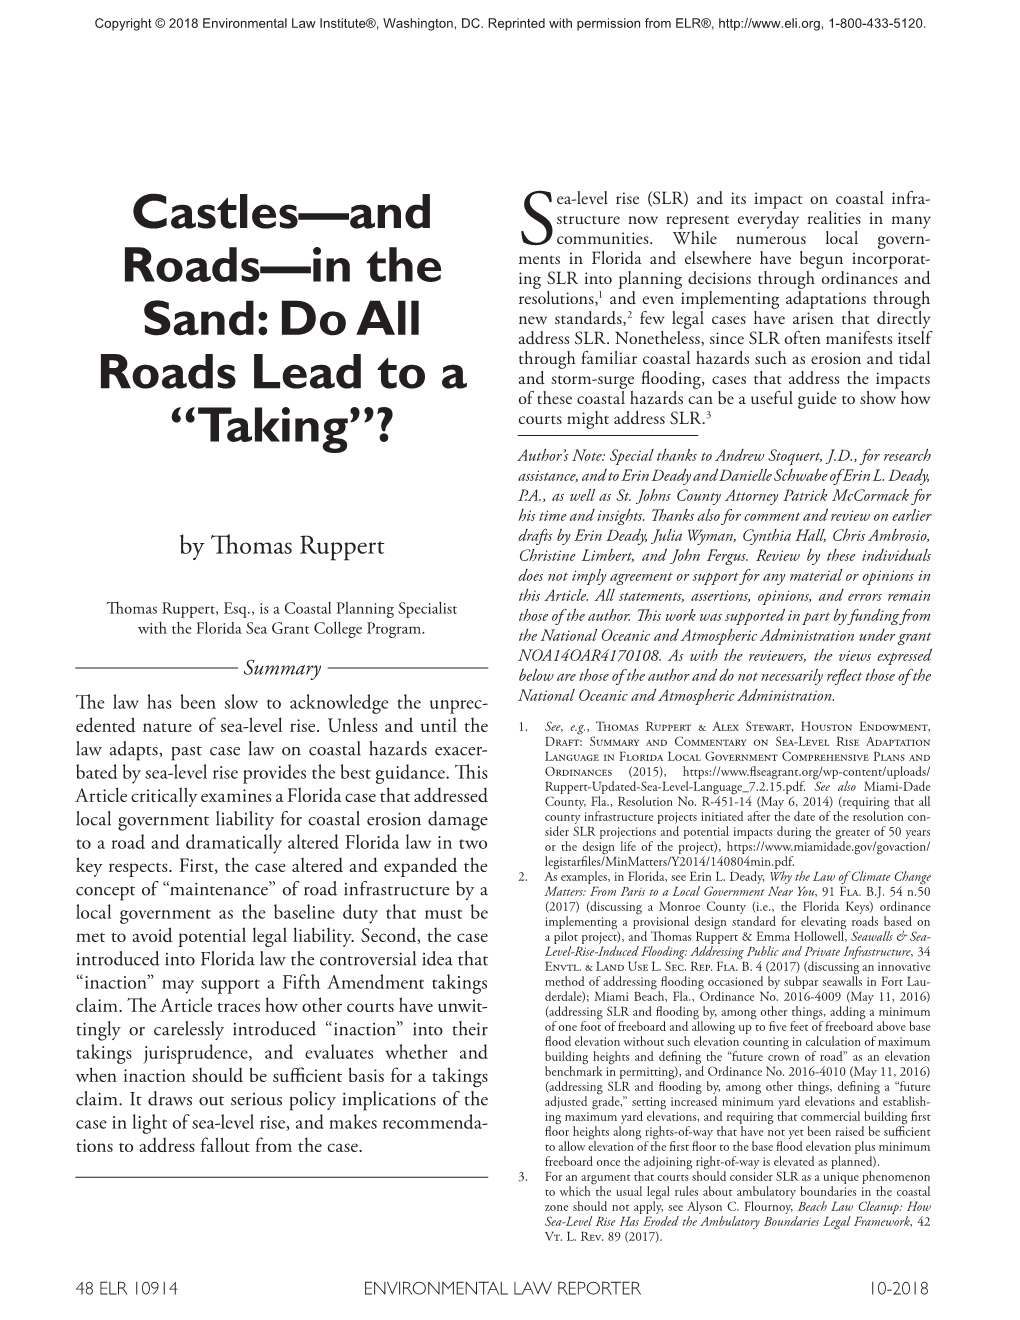 Castles—And Roads—In the Sand